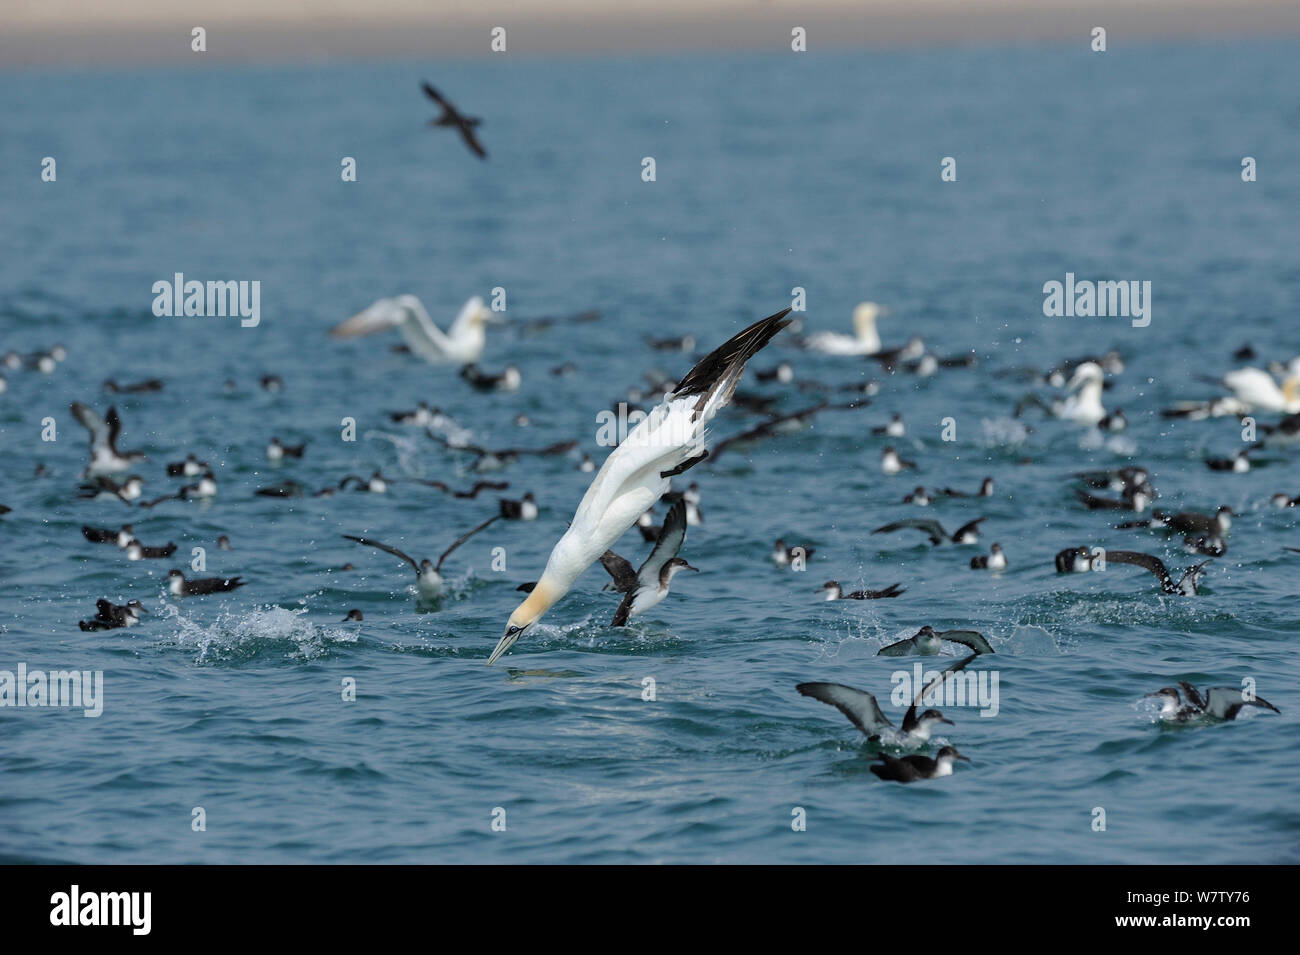 Diving Gannet (Morus bassanus) with Manx Shearwaters (Puffinus puffinus) feeding at the surface, south coast of Anglesey, North Wales, UK. Stock Photo